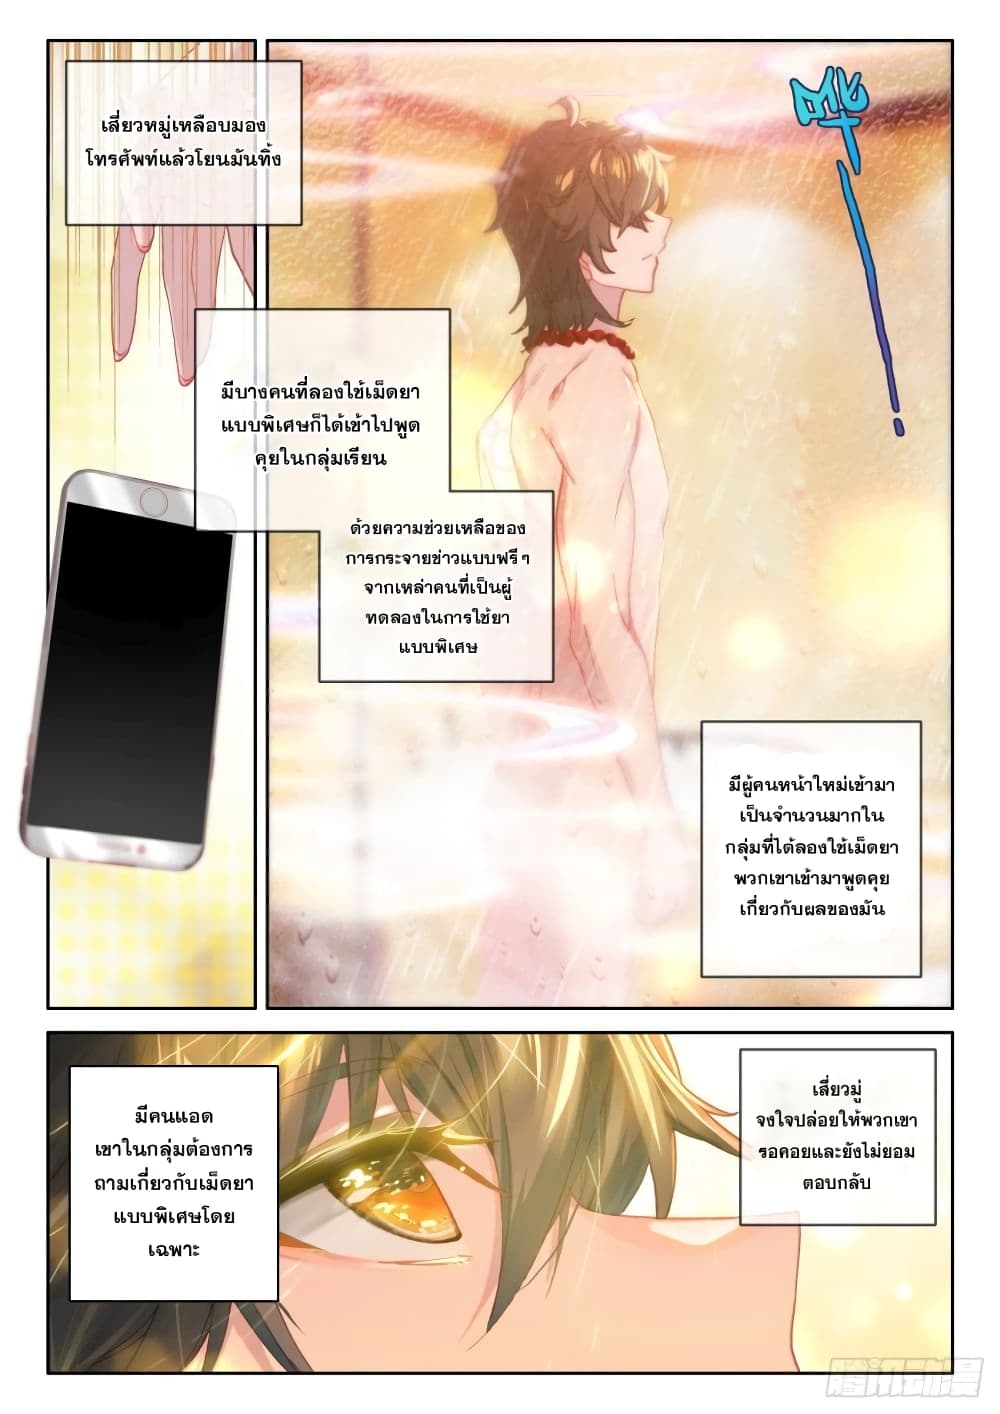 Becoming Immortal by Paying Cash ตอนที่ 5 (15)